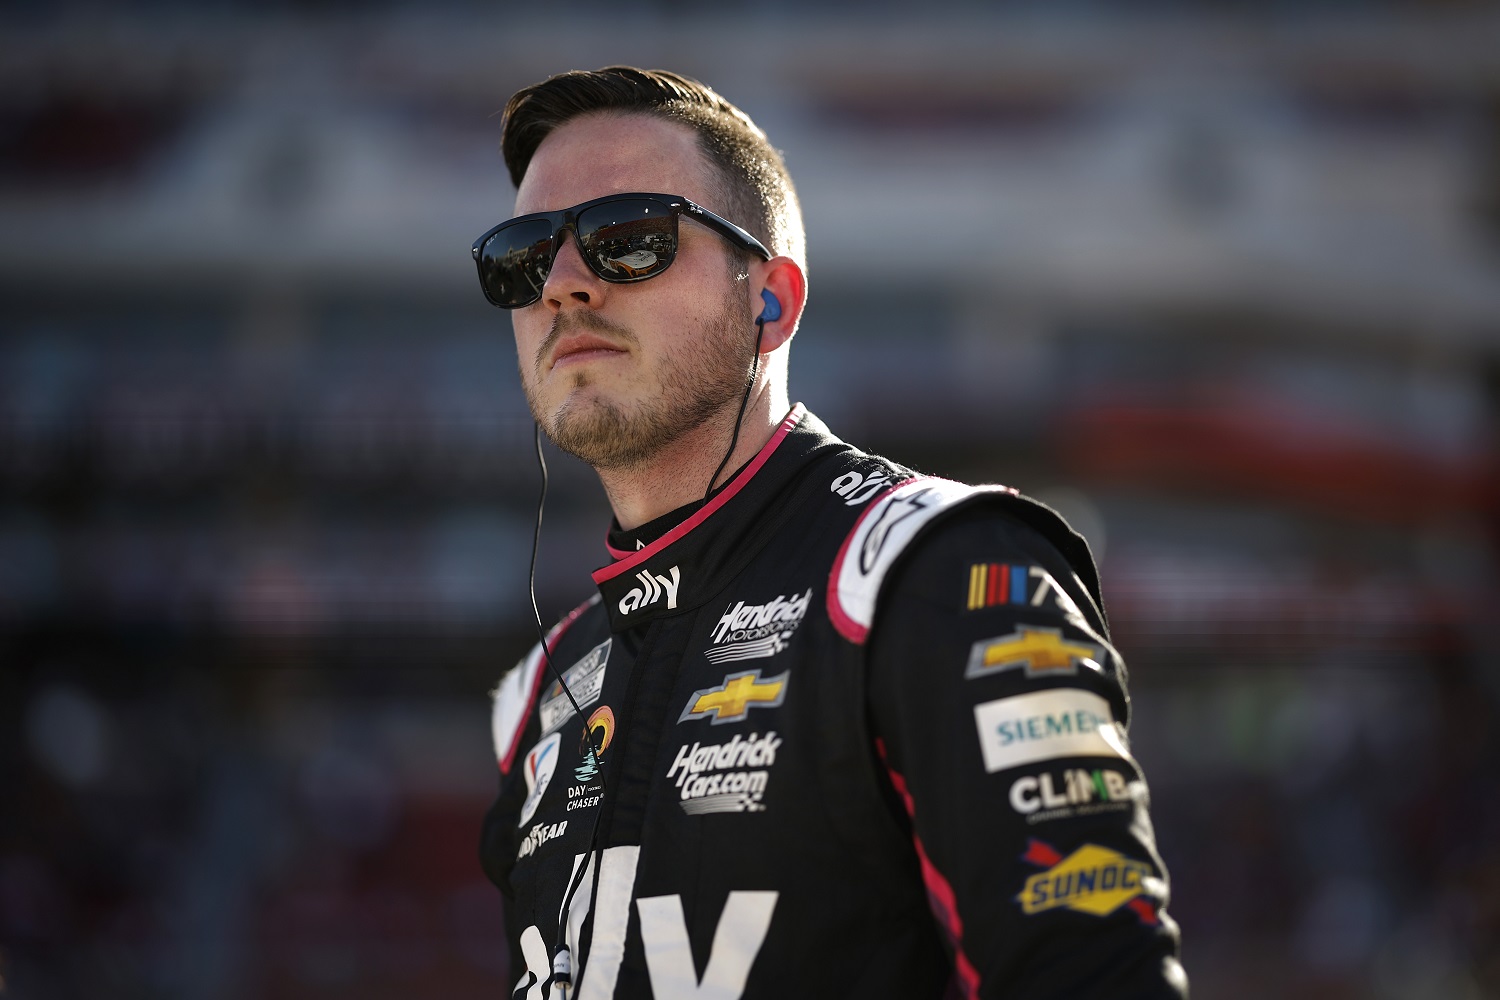 Alex Bowman, driver of the No. 48 Ally Chevrolet, looks on during qualifying heats for the NASCAR Busch Light Clash on Feb. 5, 2023.